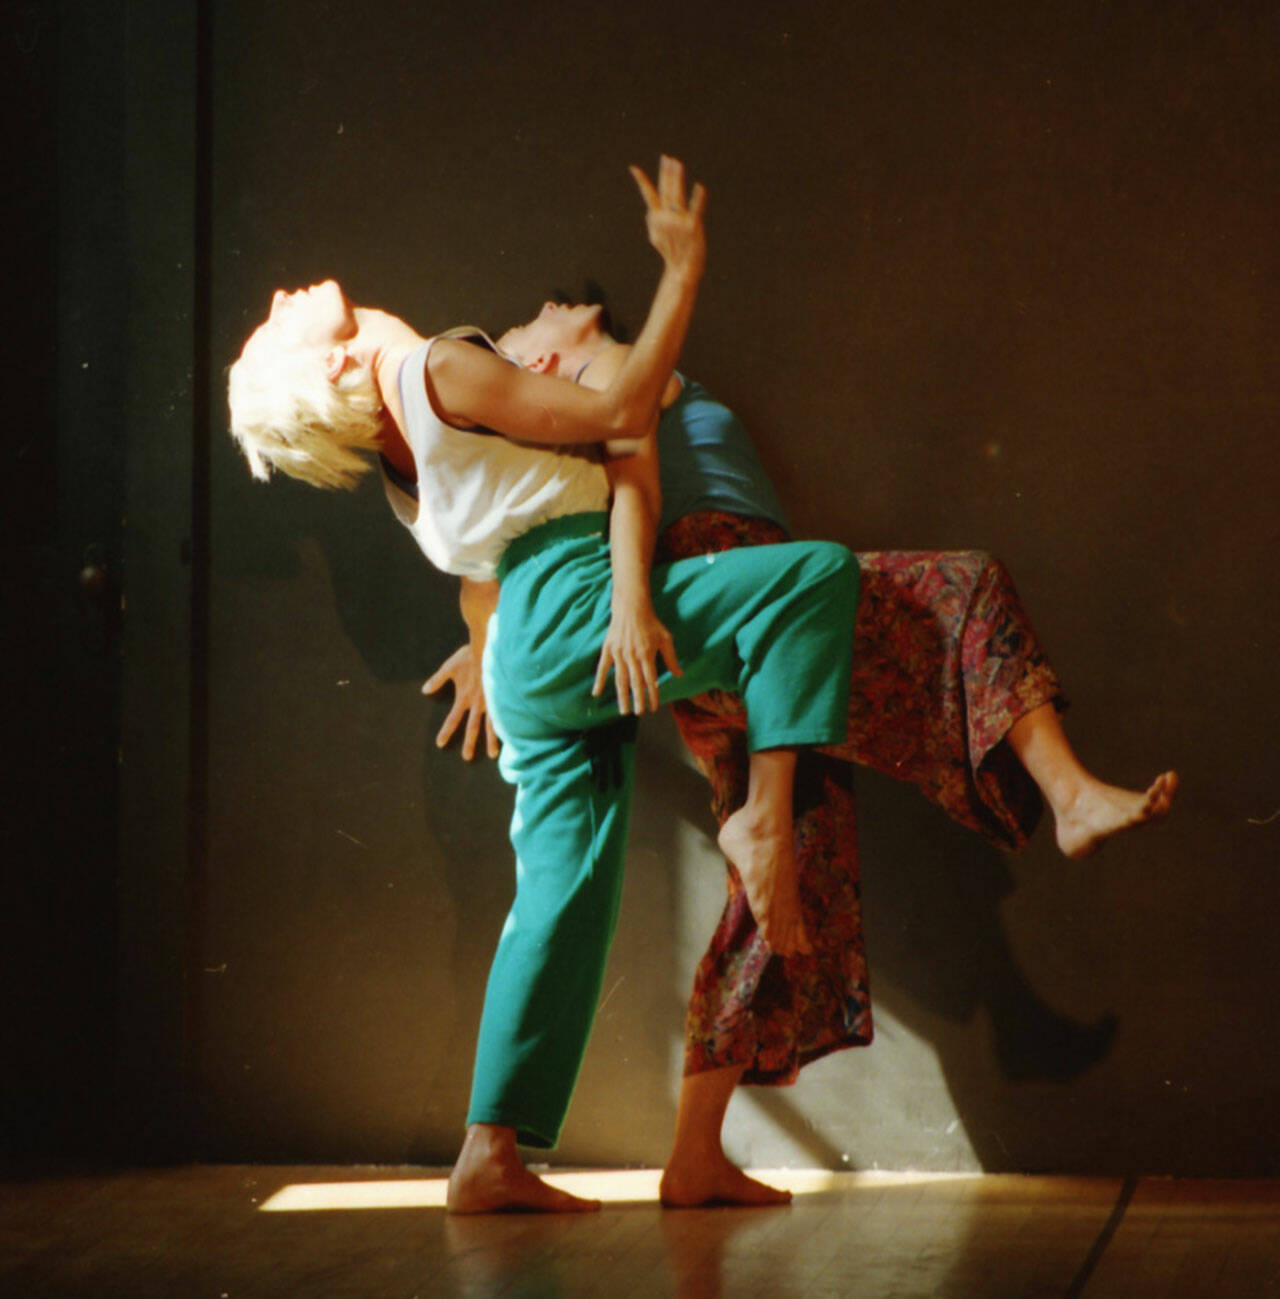 (Ray Chung Photo) “Redux Forward,” a pair of events on July 11 and 12 at Open Space for Arts & Community will celebrate the 50-year history of Contact Improvisation, a dance form based on the principles of gravity, body weight, momentum, and trust.